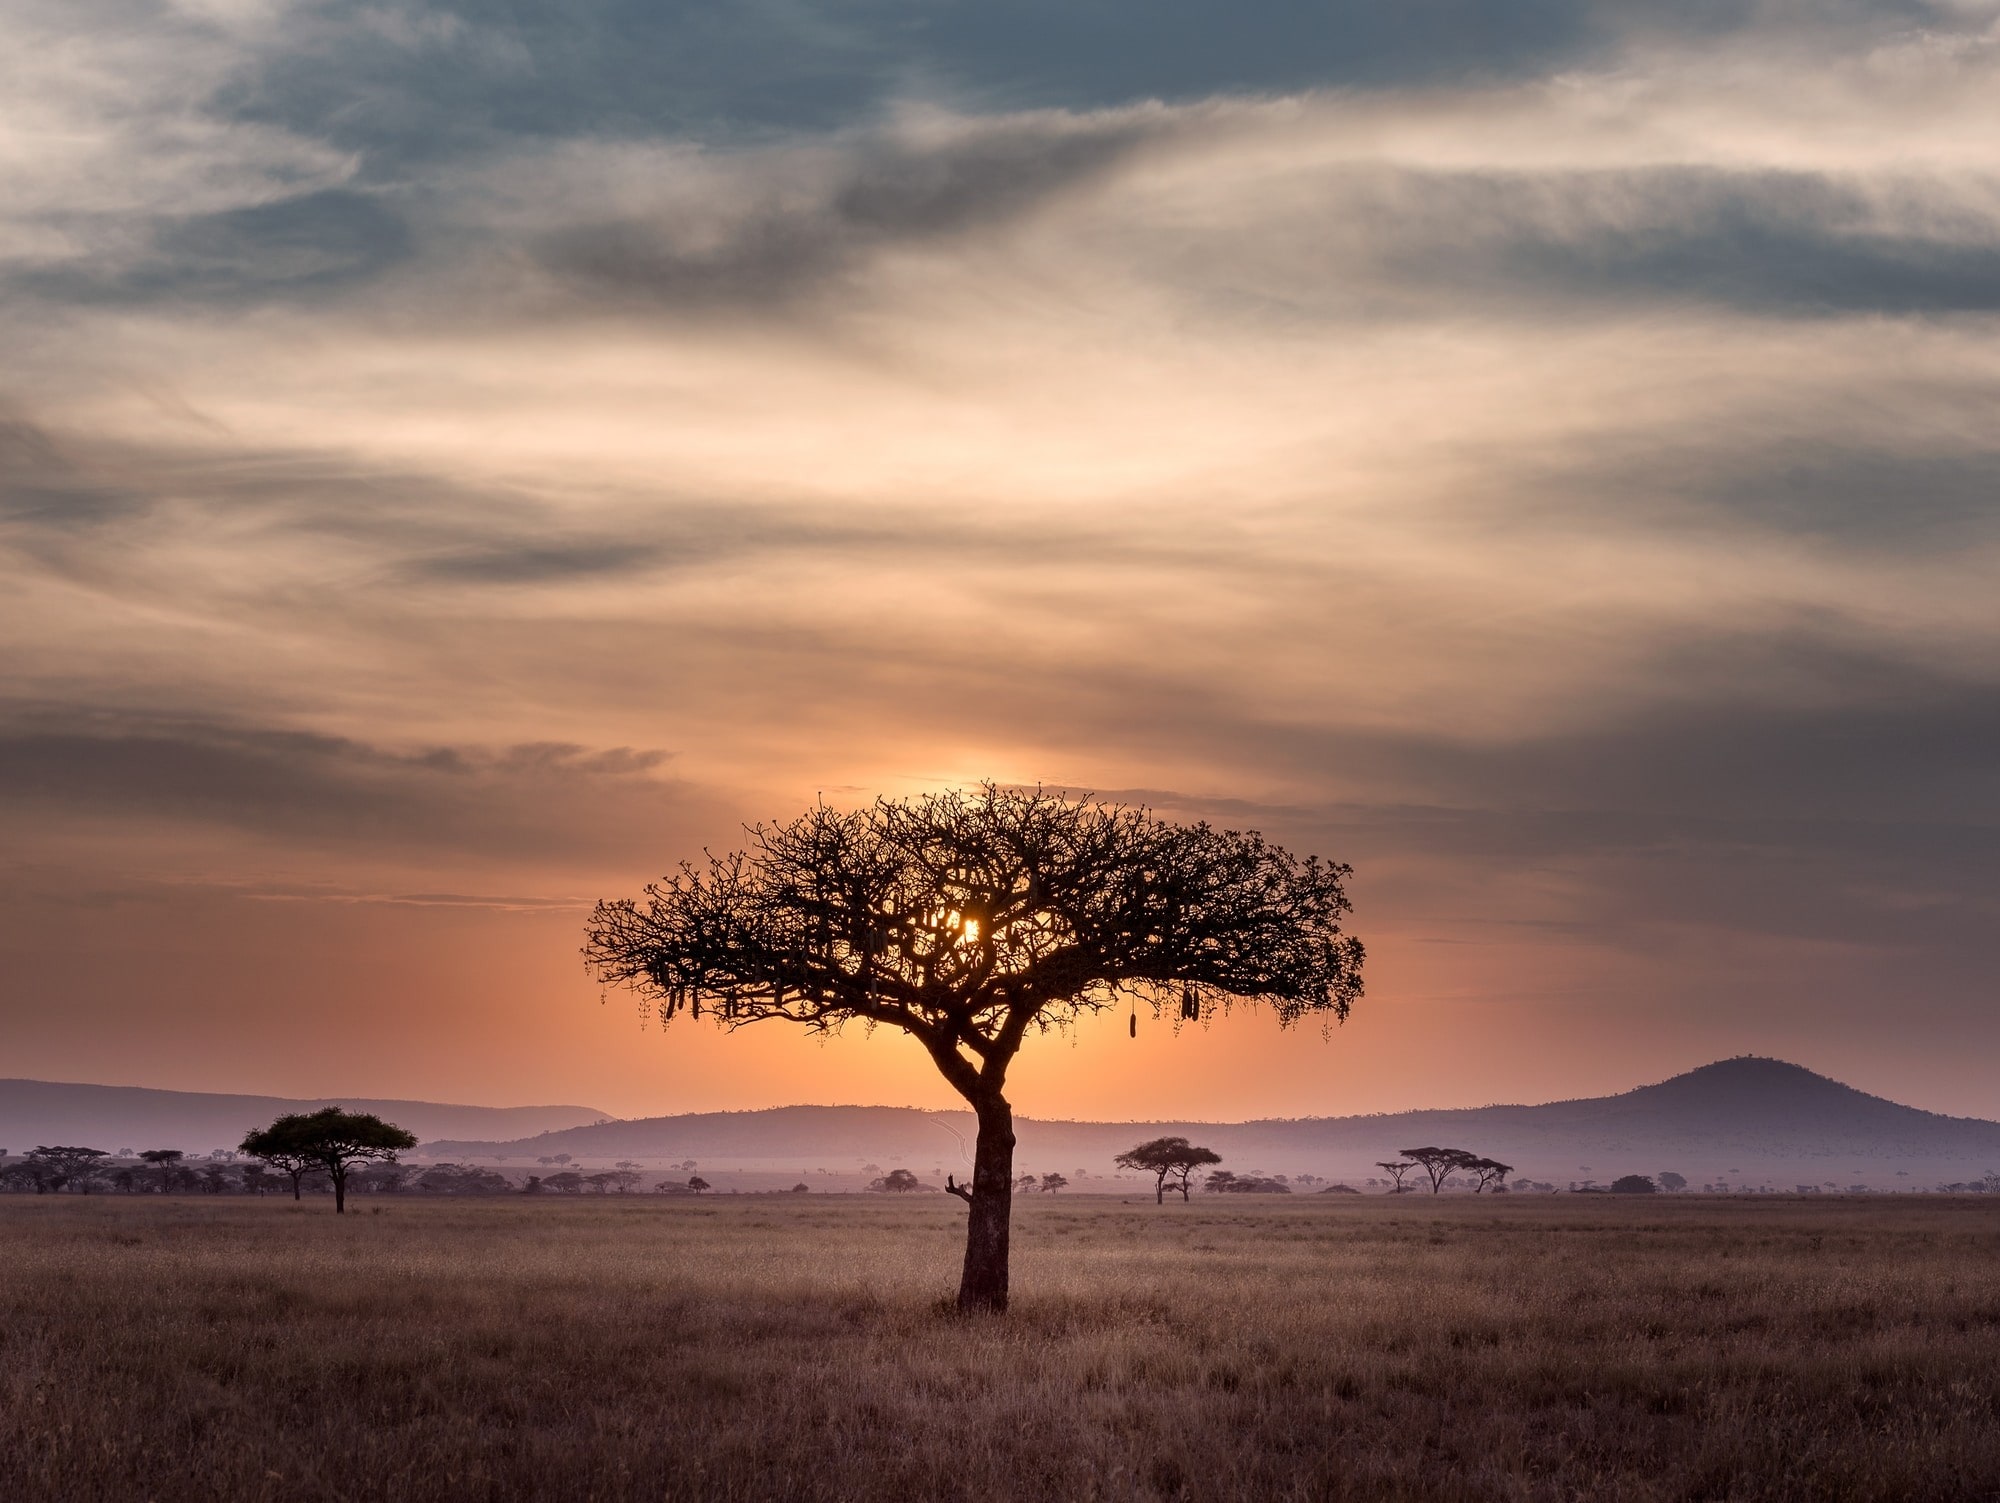 The oldest desert in the world; a wild, beautiful coastline; one of Africa's greatest game parks